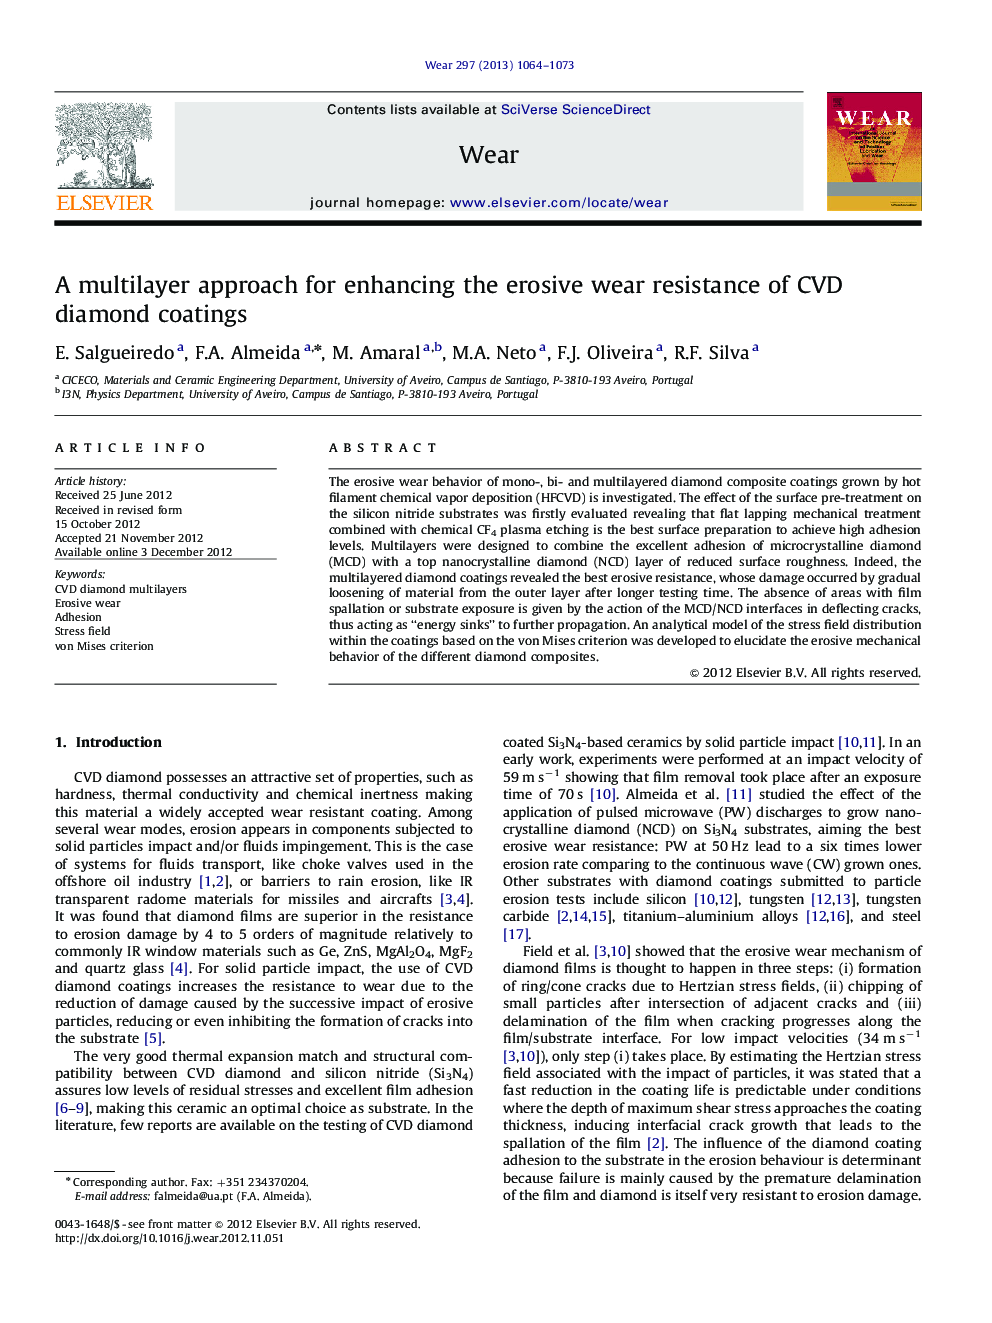 A multilayer approach for enhancing the erosive wear resistance of CVD diamond coatings